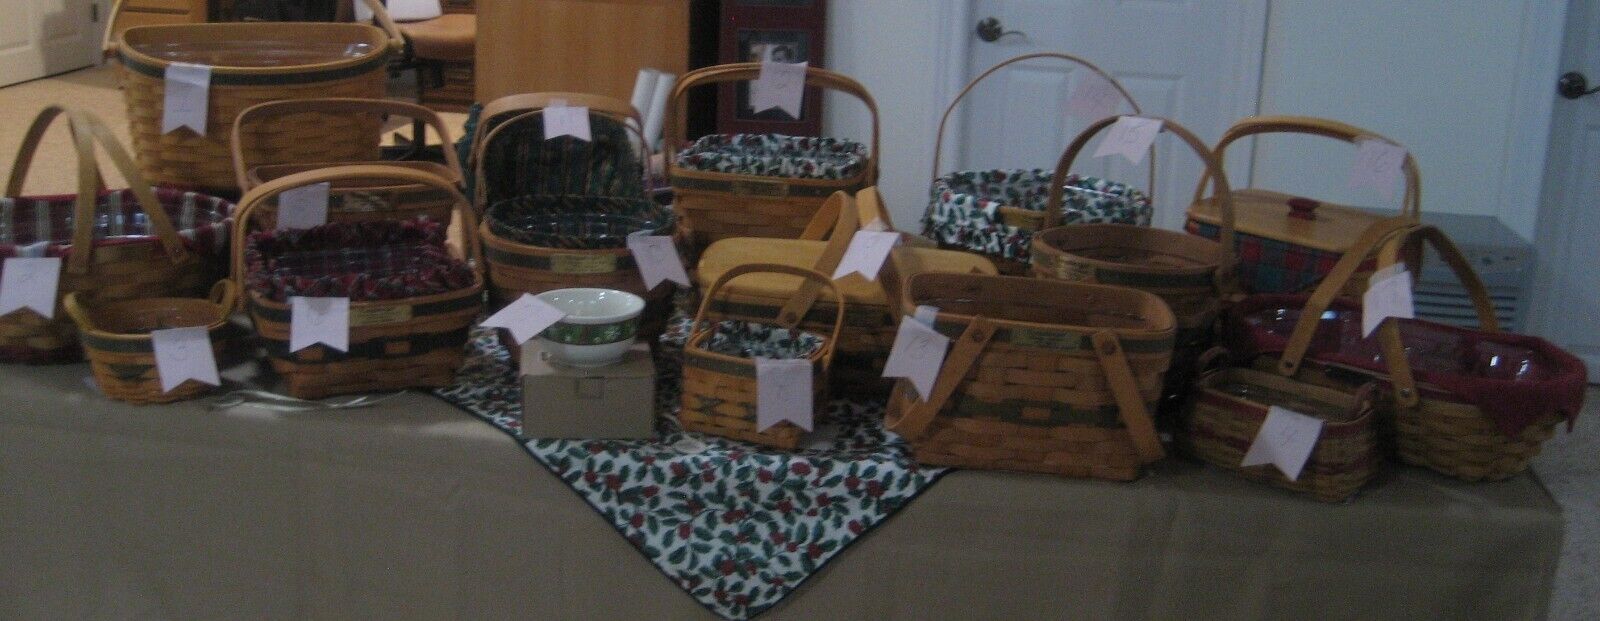 Longaberger Basket Collection Lot Of 16 Christmas Baskets and 1 Holiday Bowl